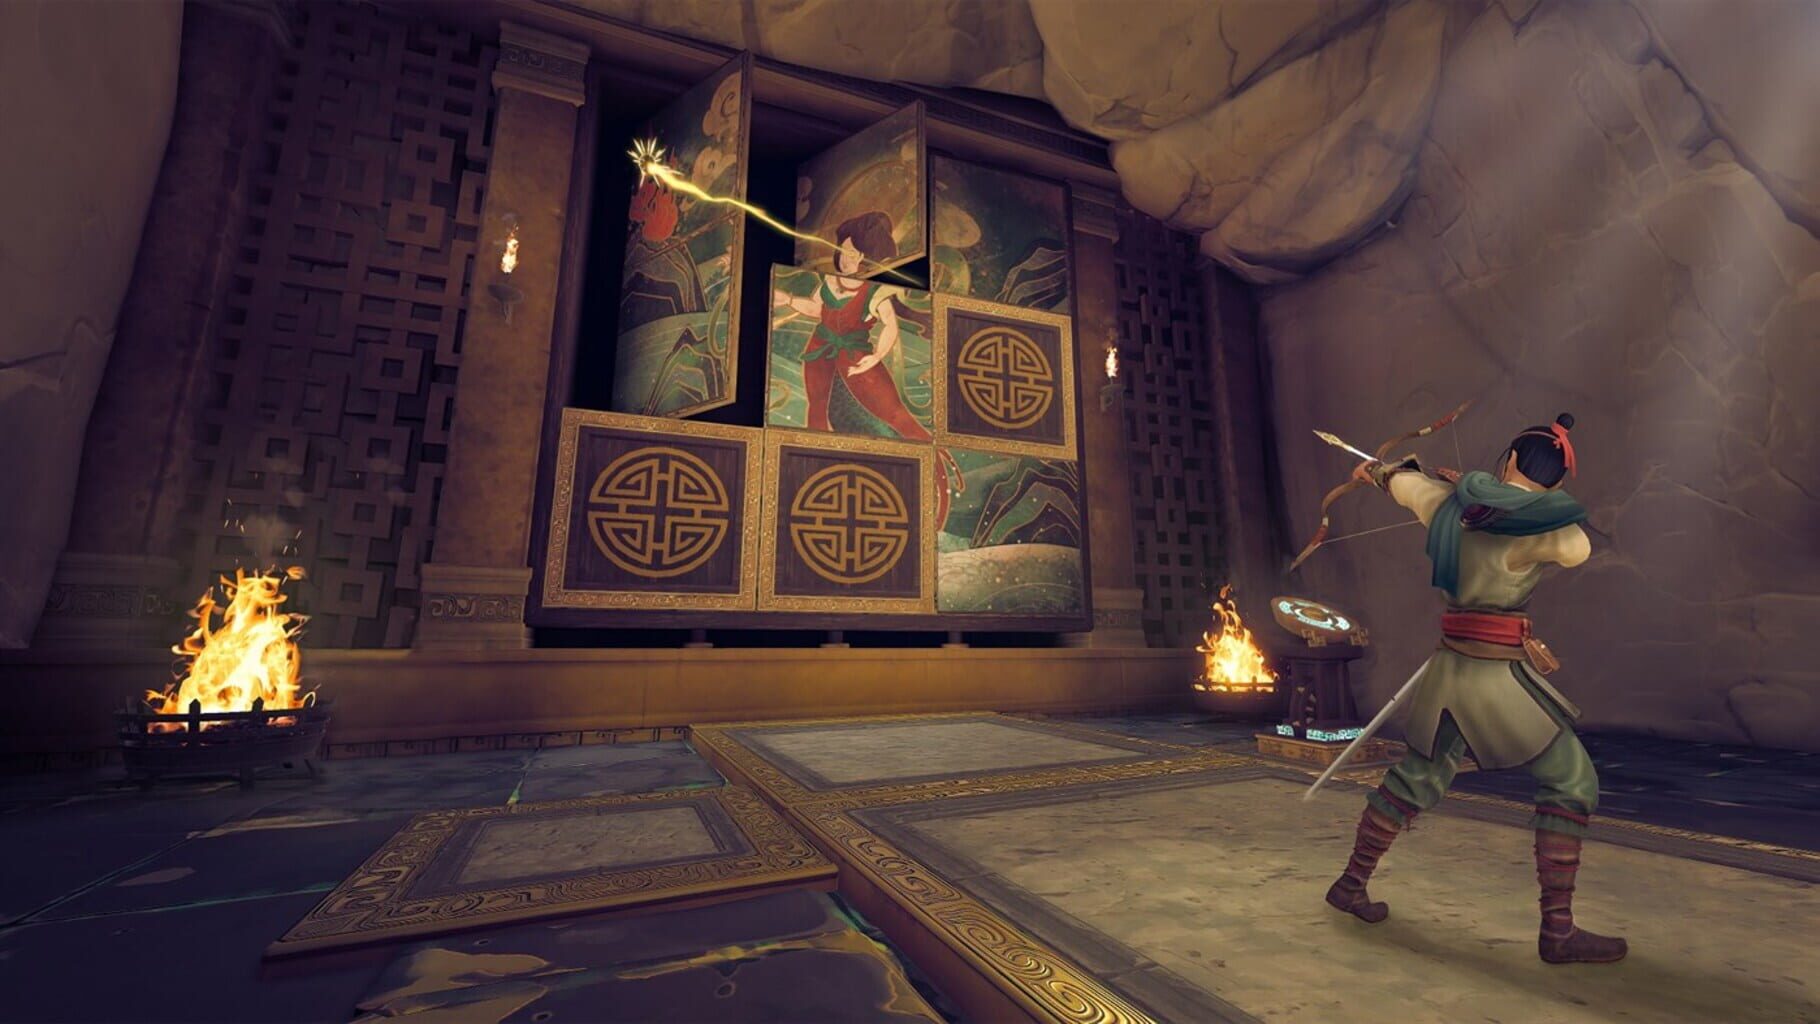 Immortals Fenyx Rising: Myths of the Eastern Realm screenshot